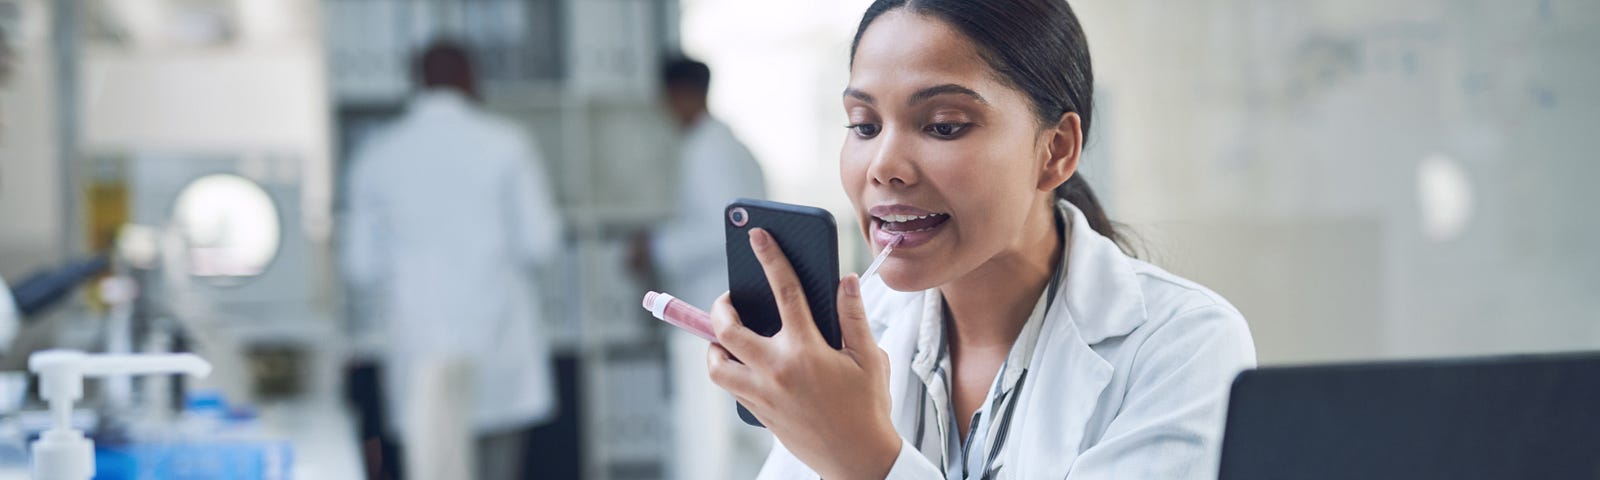 A woman in a lab coat applies lip gloss while staring at her phone. She is at her desk in a laboratory.